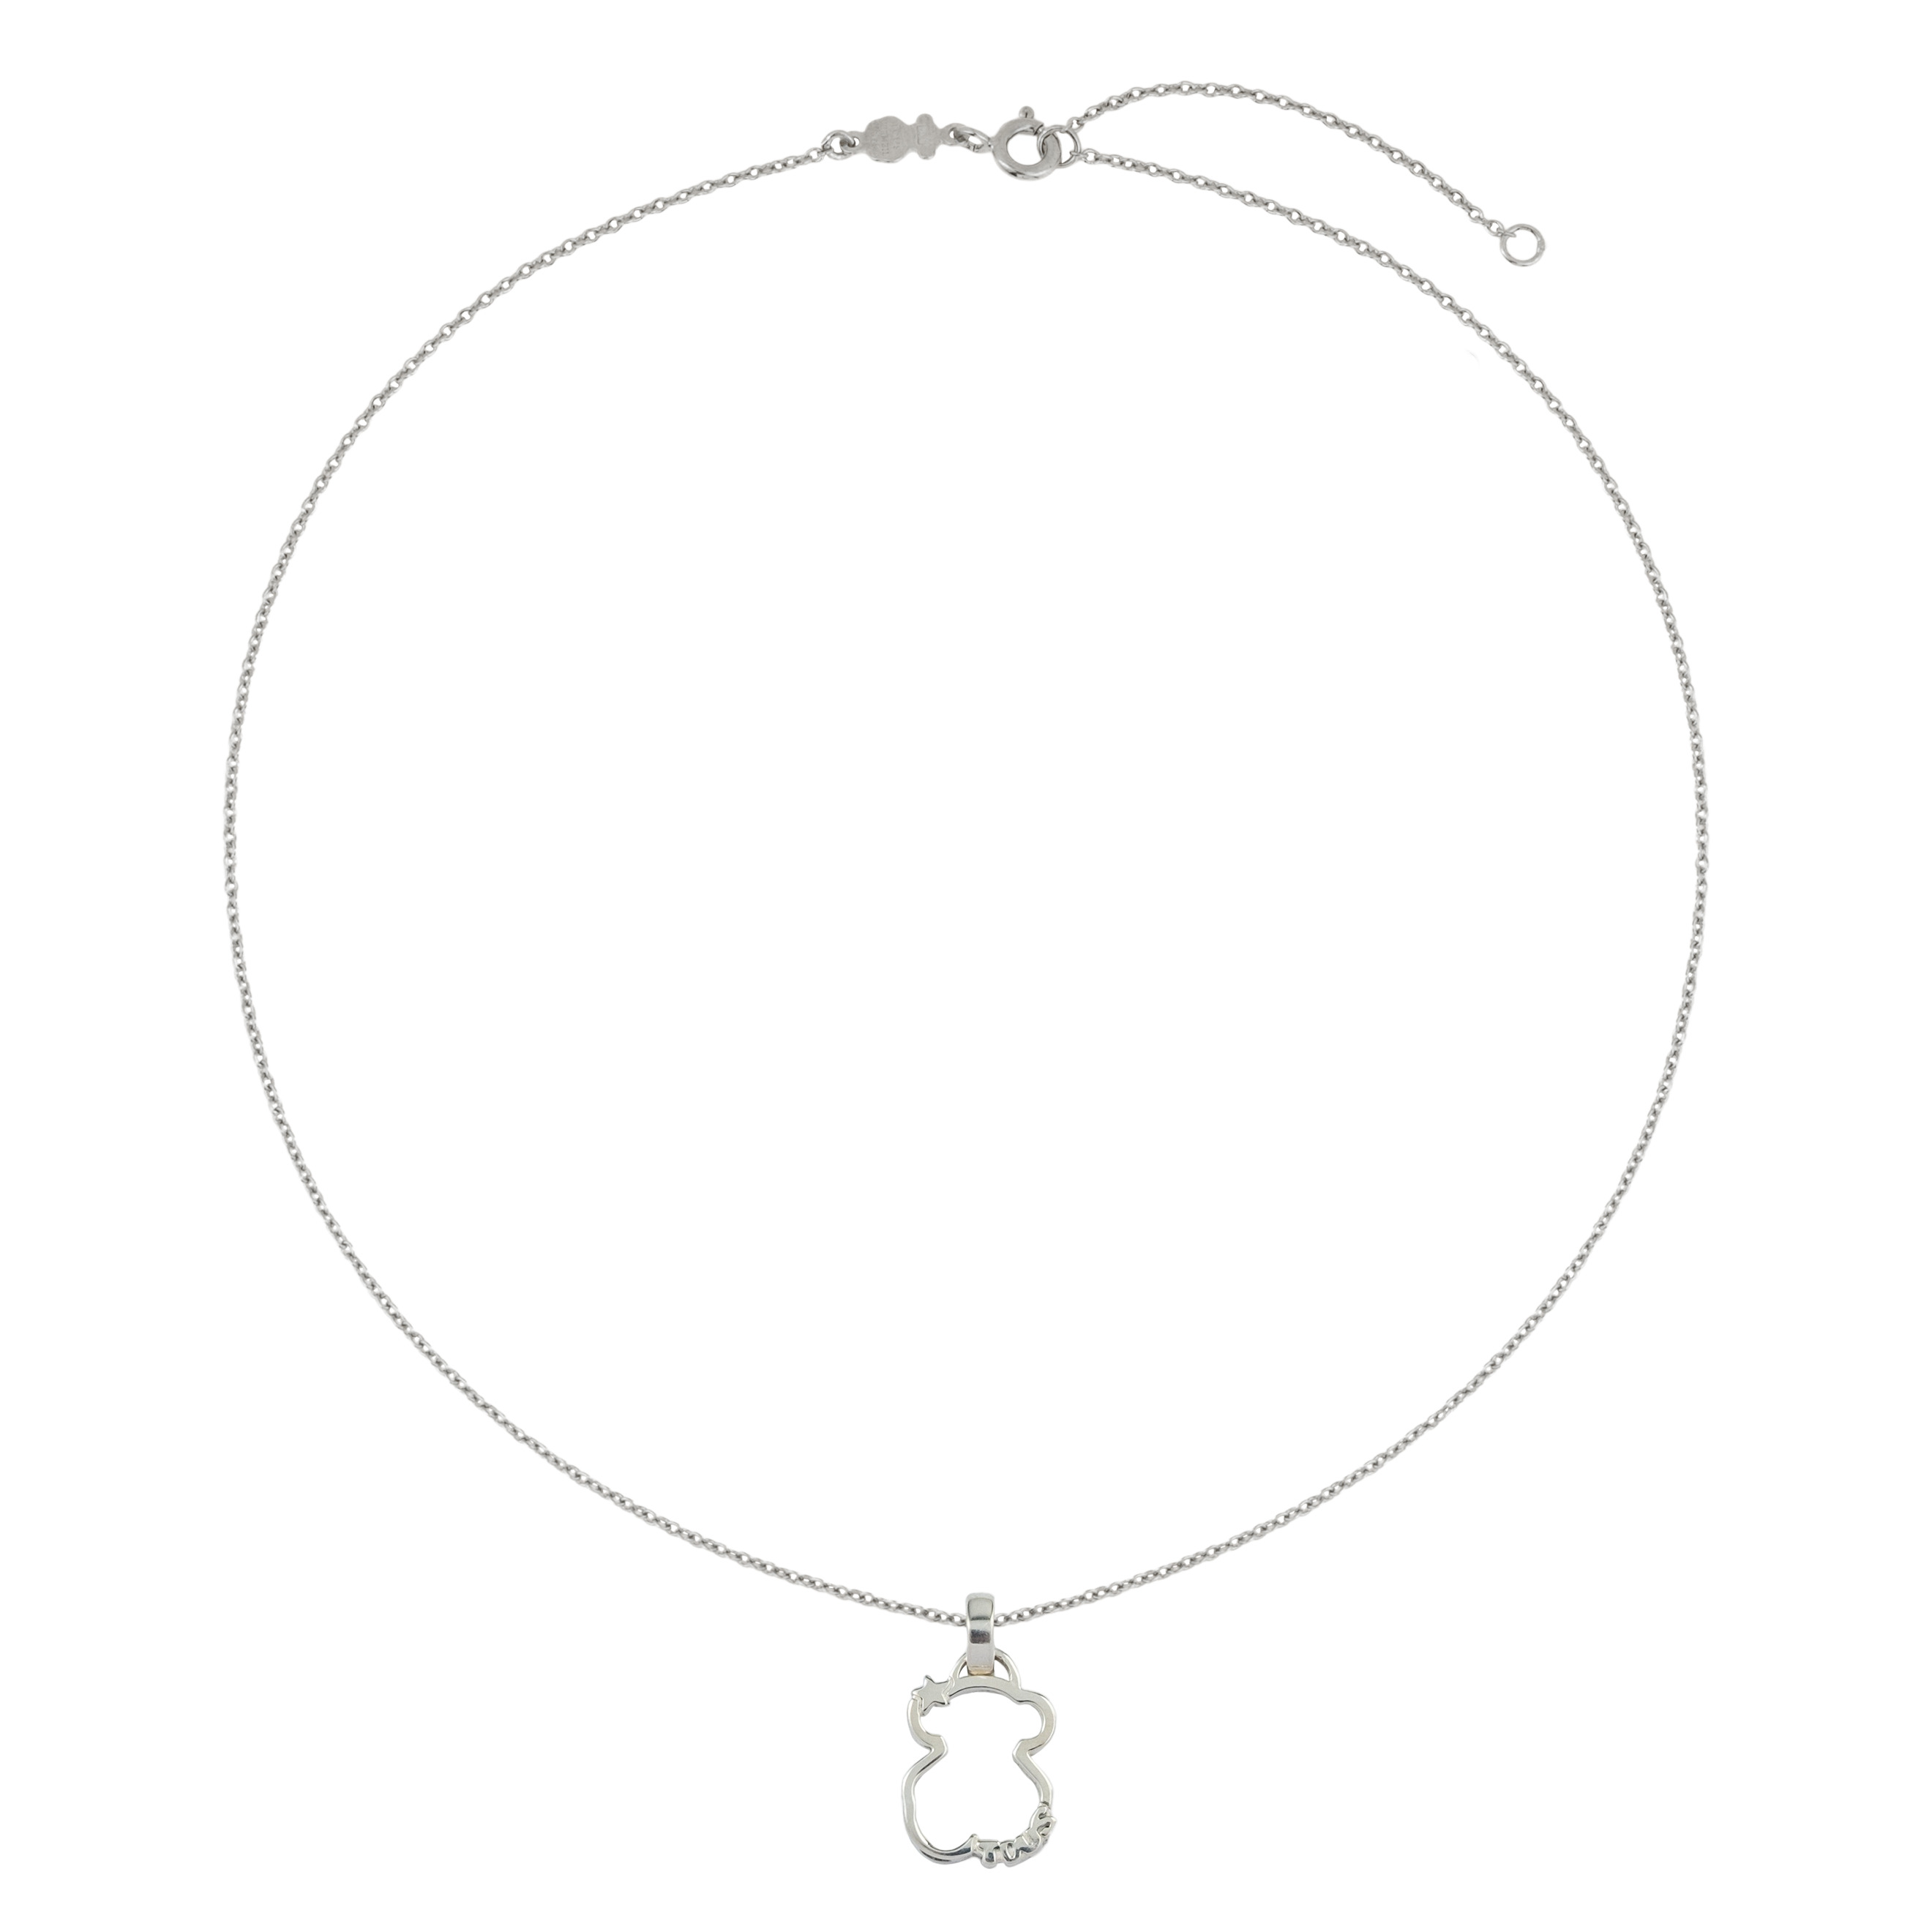 TOUS Silueta necklace made of silver – buy at Poison Drop online store, SKU